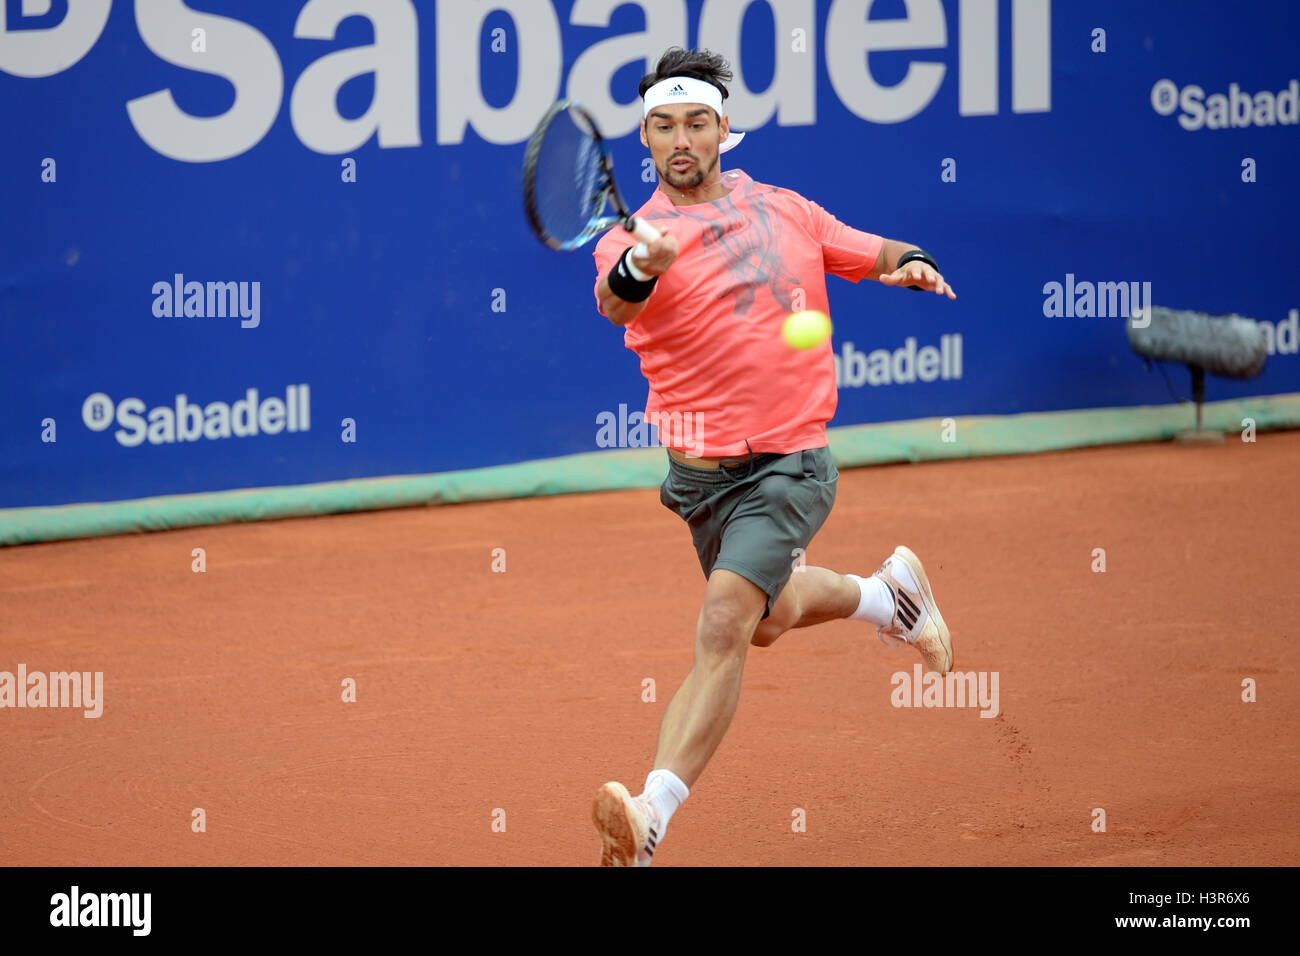 BARCELONA - APR 24: Fabio Fognini (tennis player from Italy) plays at the ATP Barcelona Open. Stock Photo